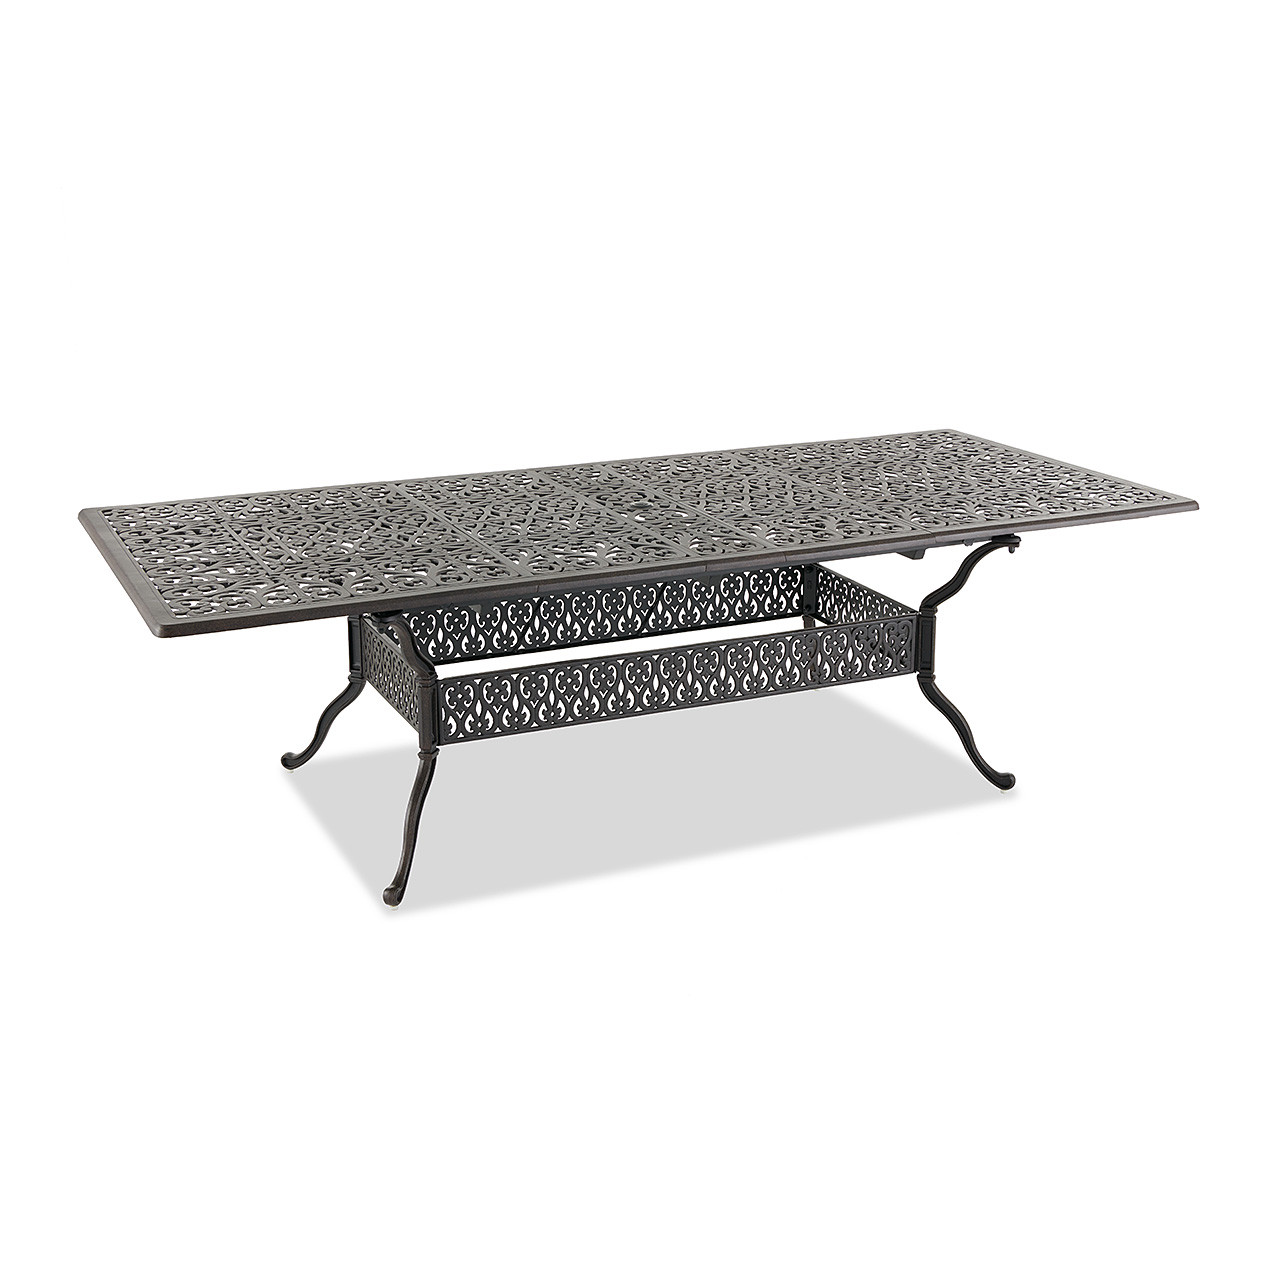 Naples Cast Aluminum with Cushions 9 Piece Dining Set + 71-103 x 44 in. Double Extension Table